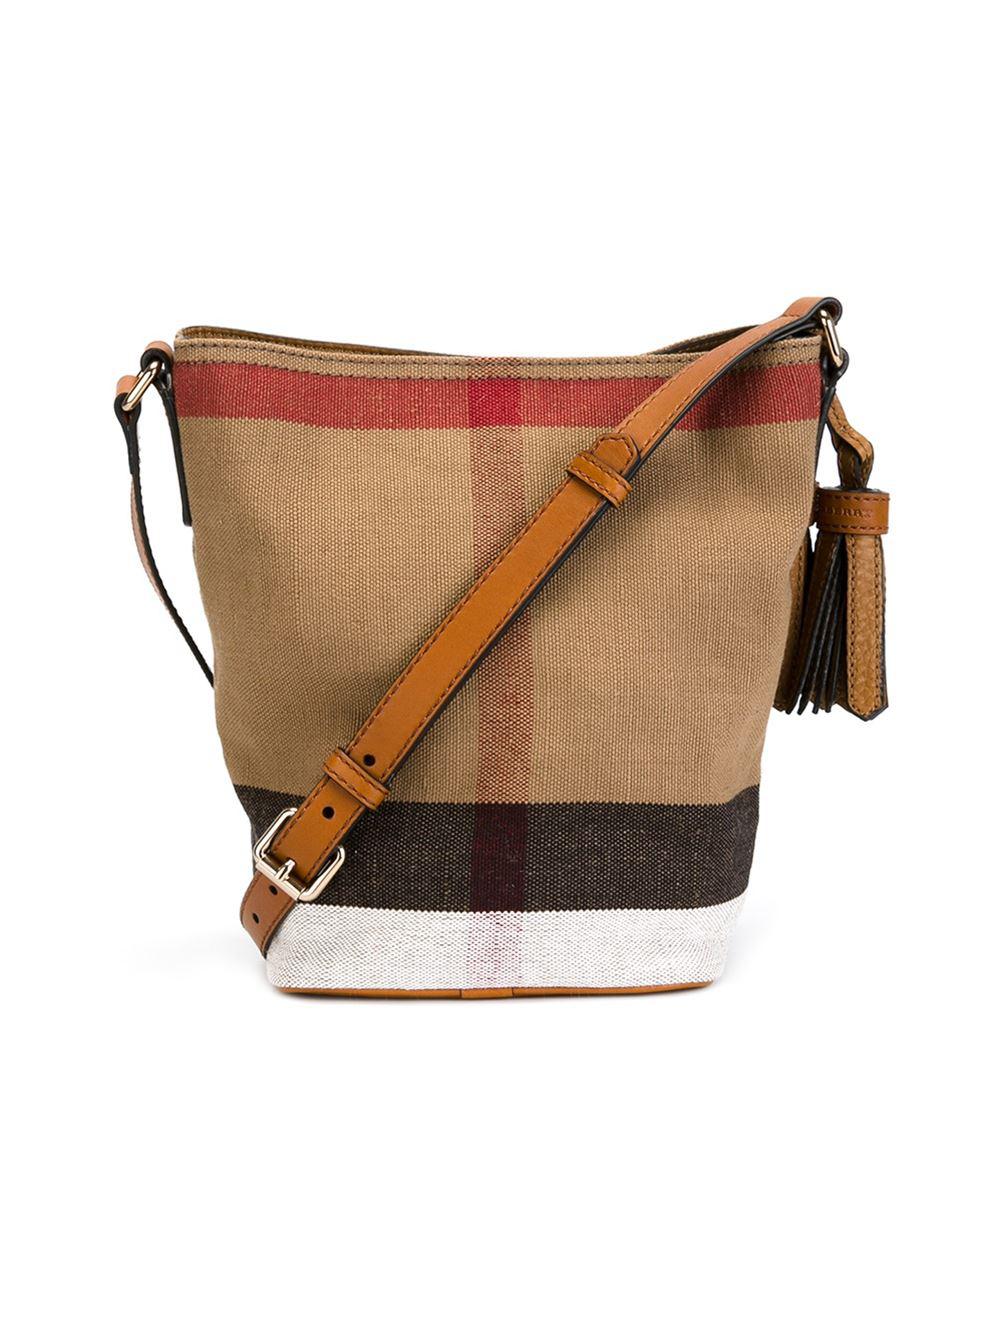 Burberry Ashby Small Canvas Check & Leather Crossbody in Brown - Lyst